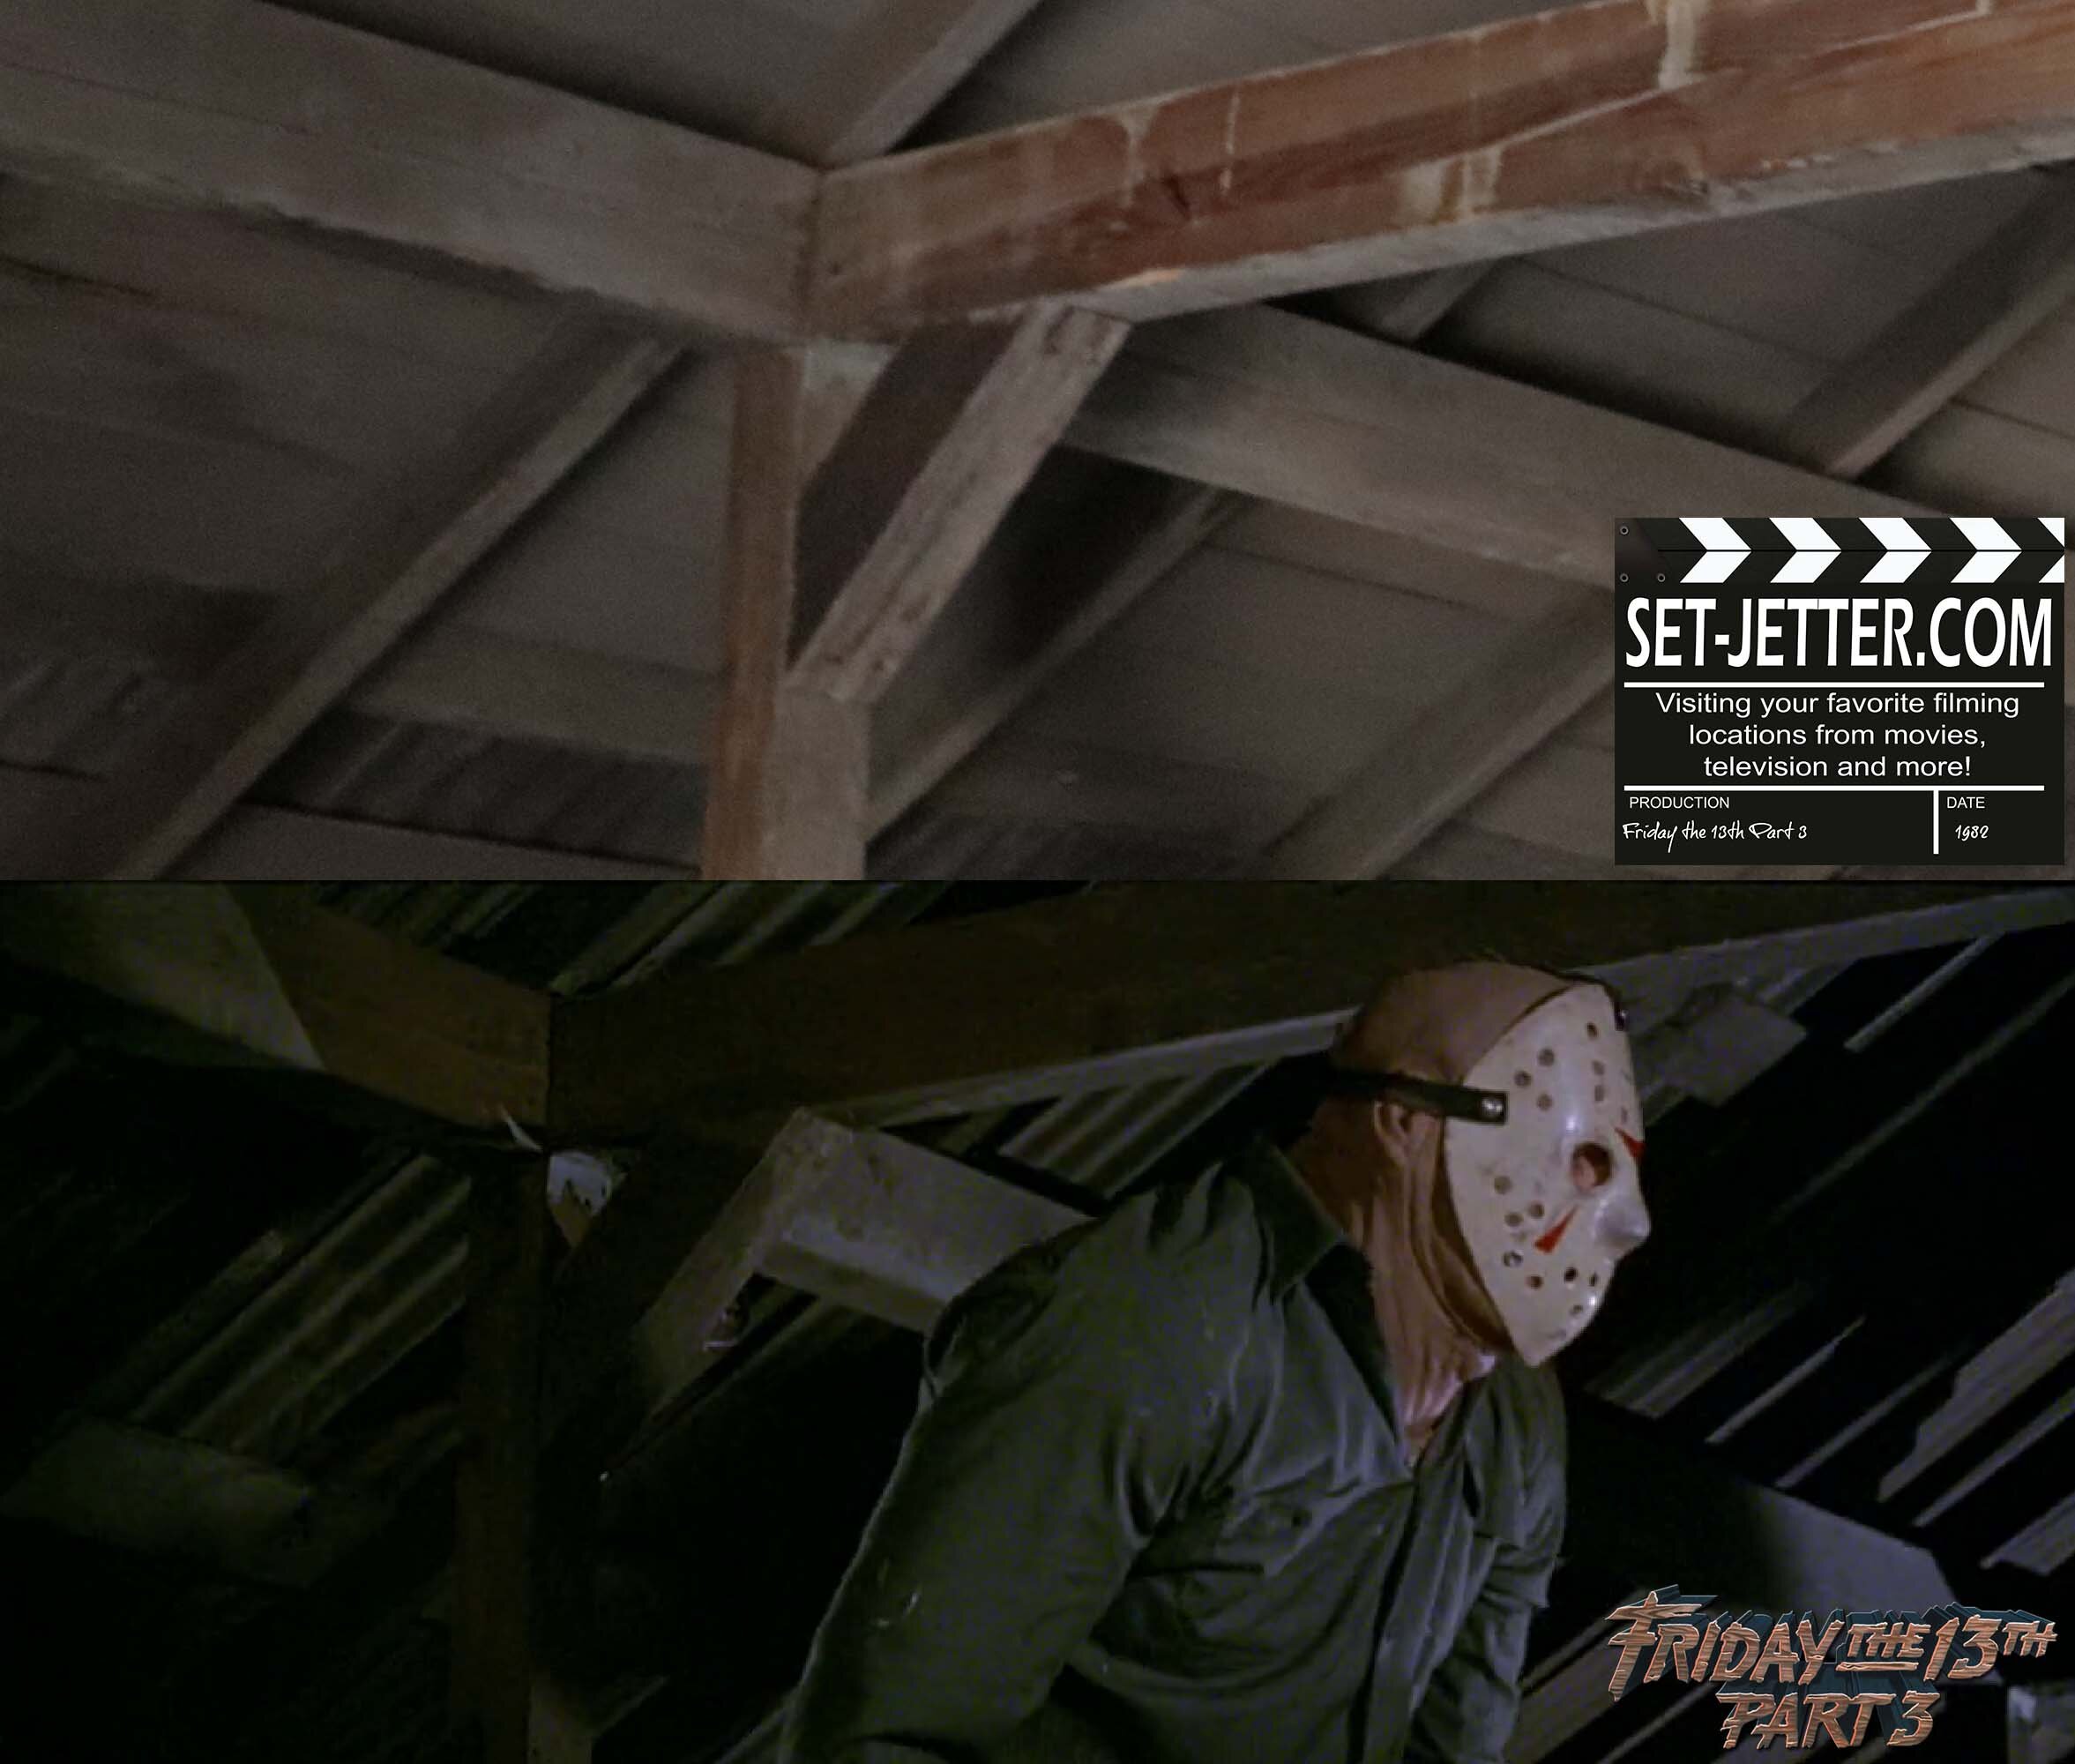 Friday the 13th Part 3 in 3-D (90).jpg